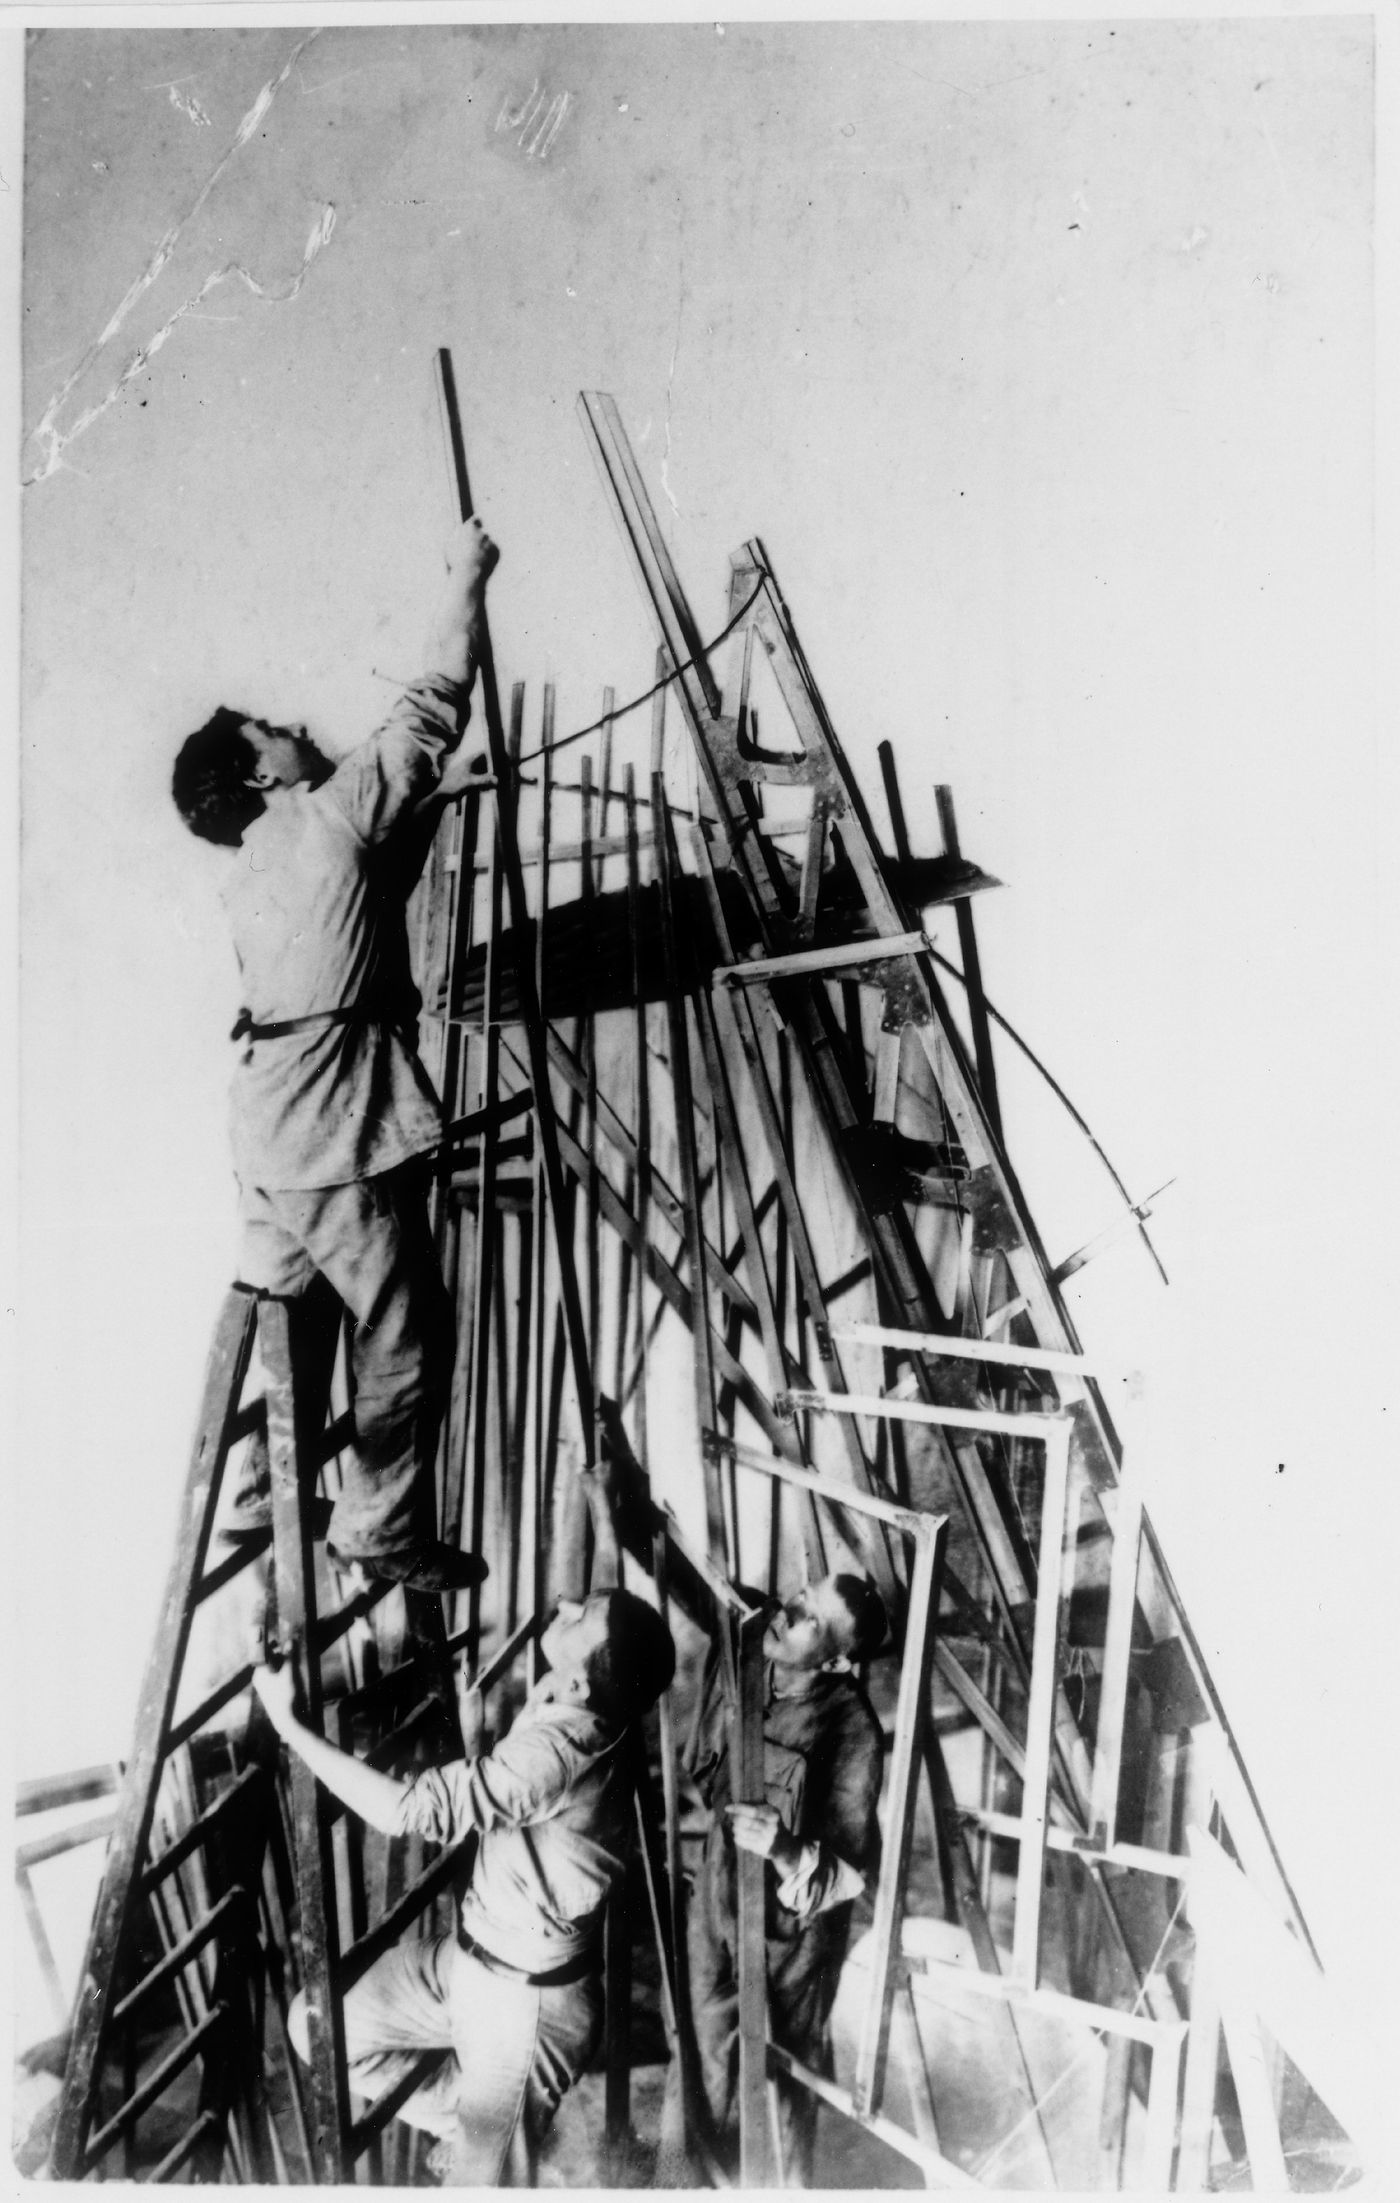 Vladimir Tatlin and his assistants I.A. Meerzon and T.M. Shapiro constructing the first model for the monument to the Third International, Petrograd, Soviet Union (now Saint Petersburg, Russia)